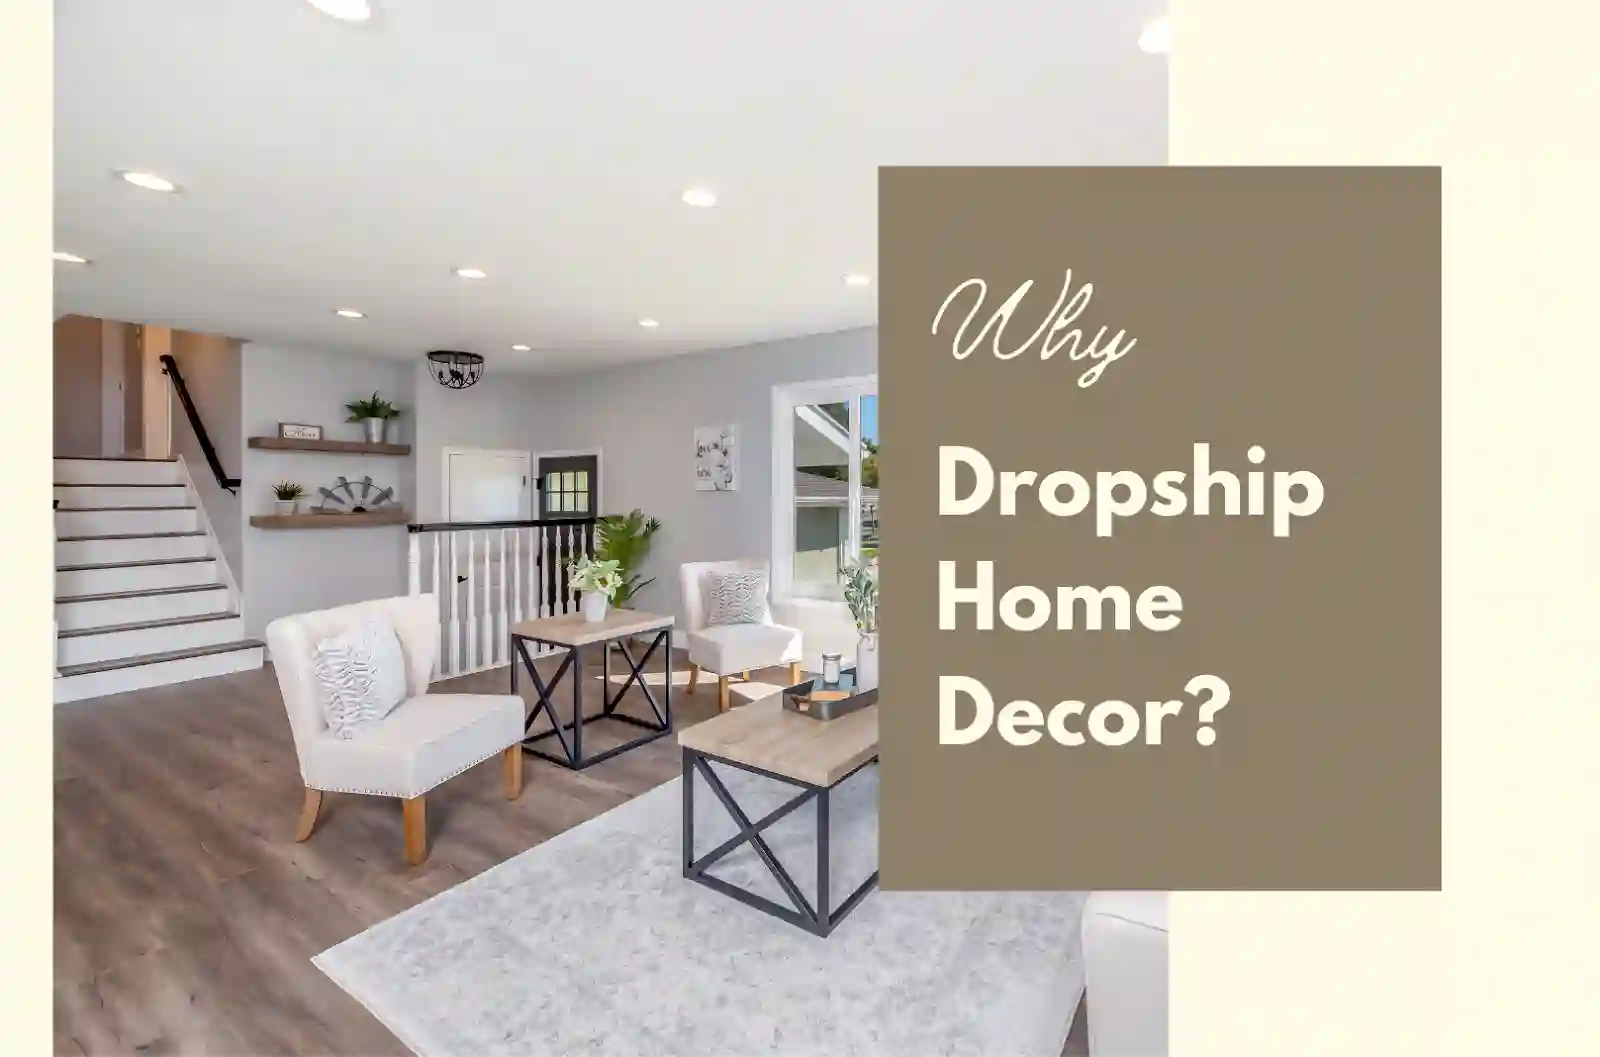 Why dropshipping home decor